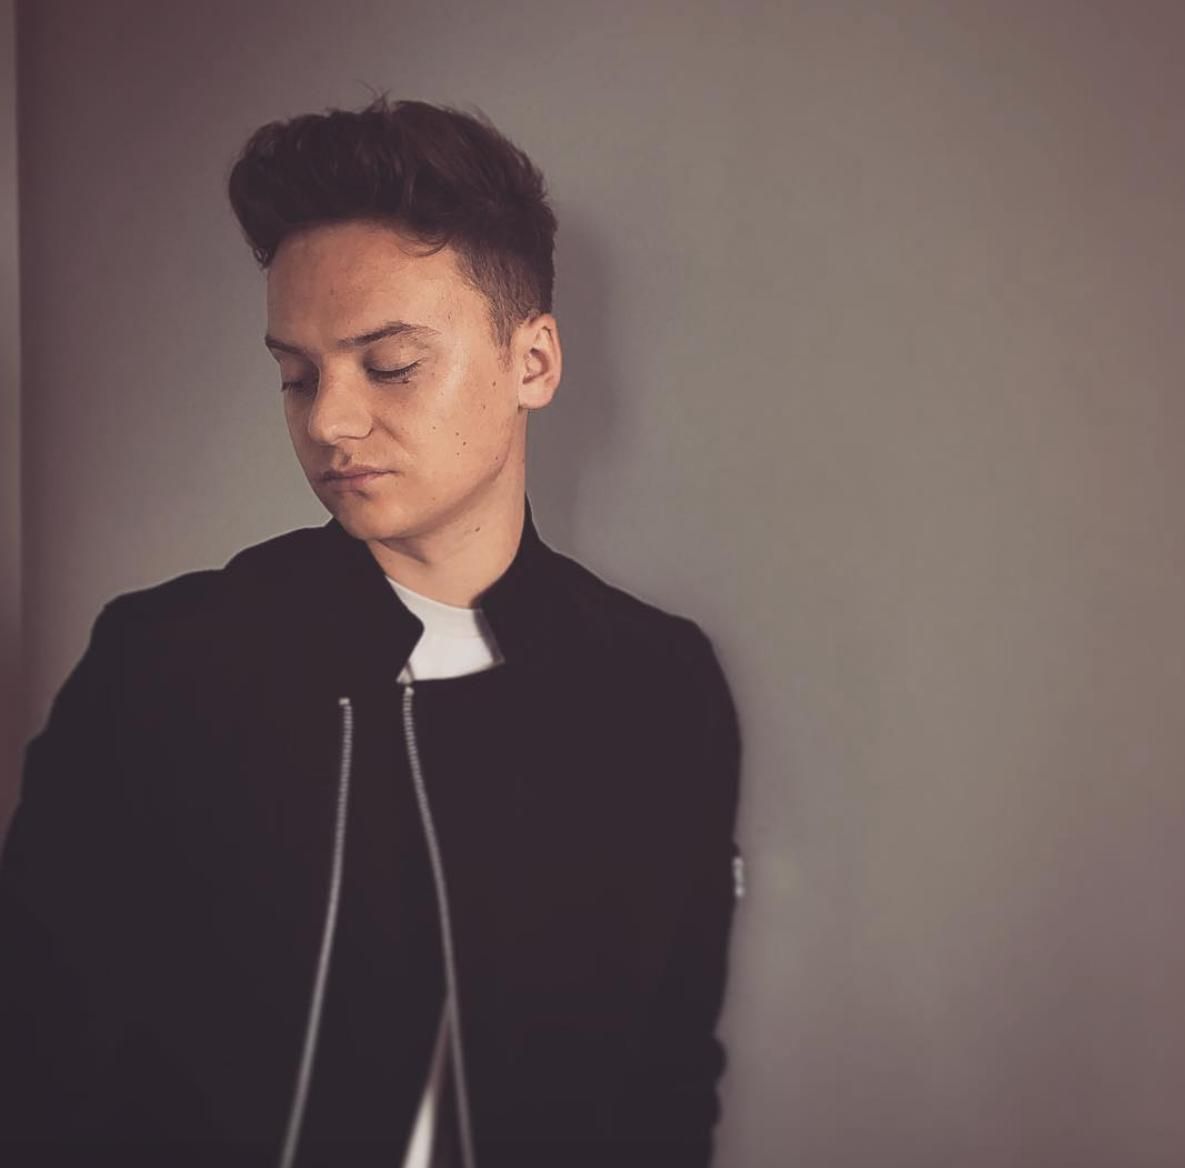 WATCH: Conor Maynard's Latest Cover Of The Chainsmokers Could Be